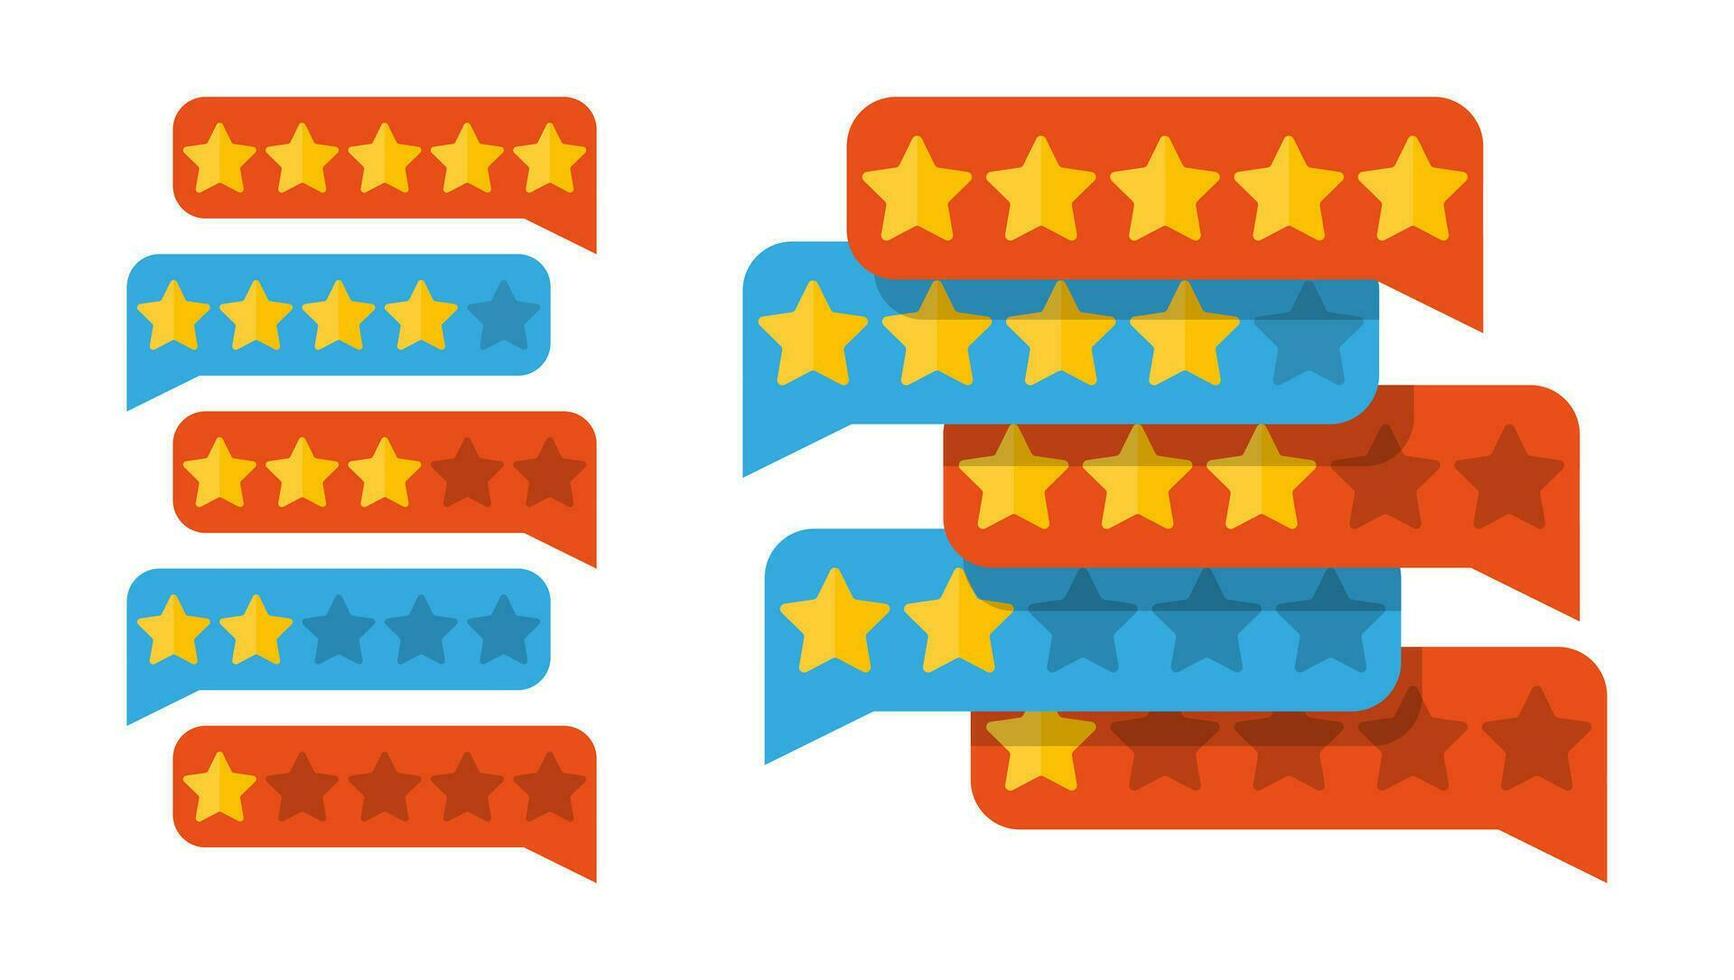 Chat clouds with golden stars. Reviews five stars. Testimonials, rating, feedback, survey, quality and review. Vector illustration in flat style